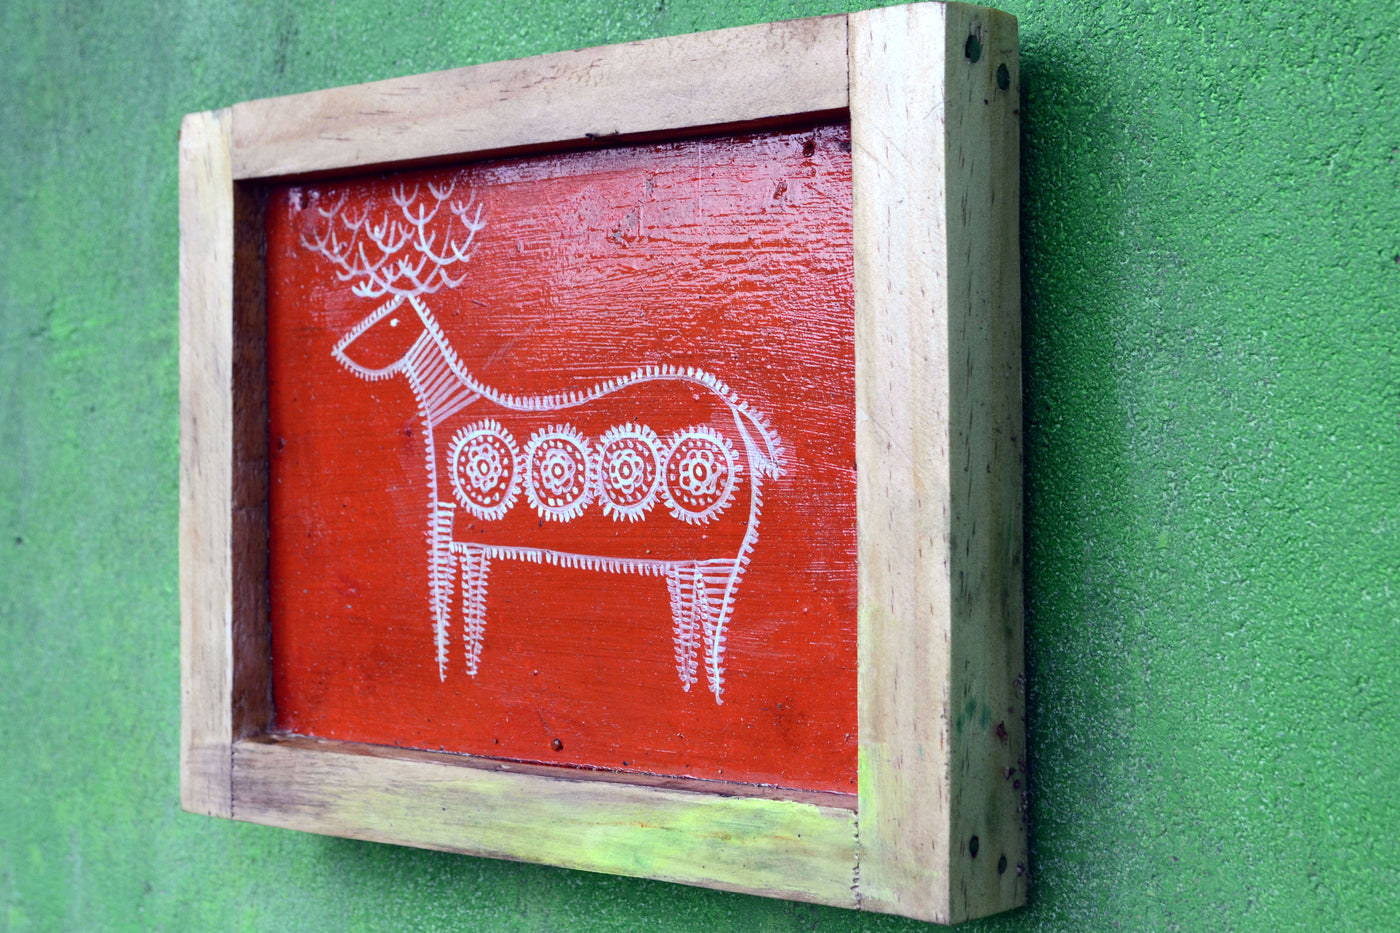 Deer wooden wall decor painting